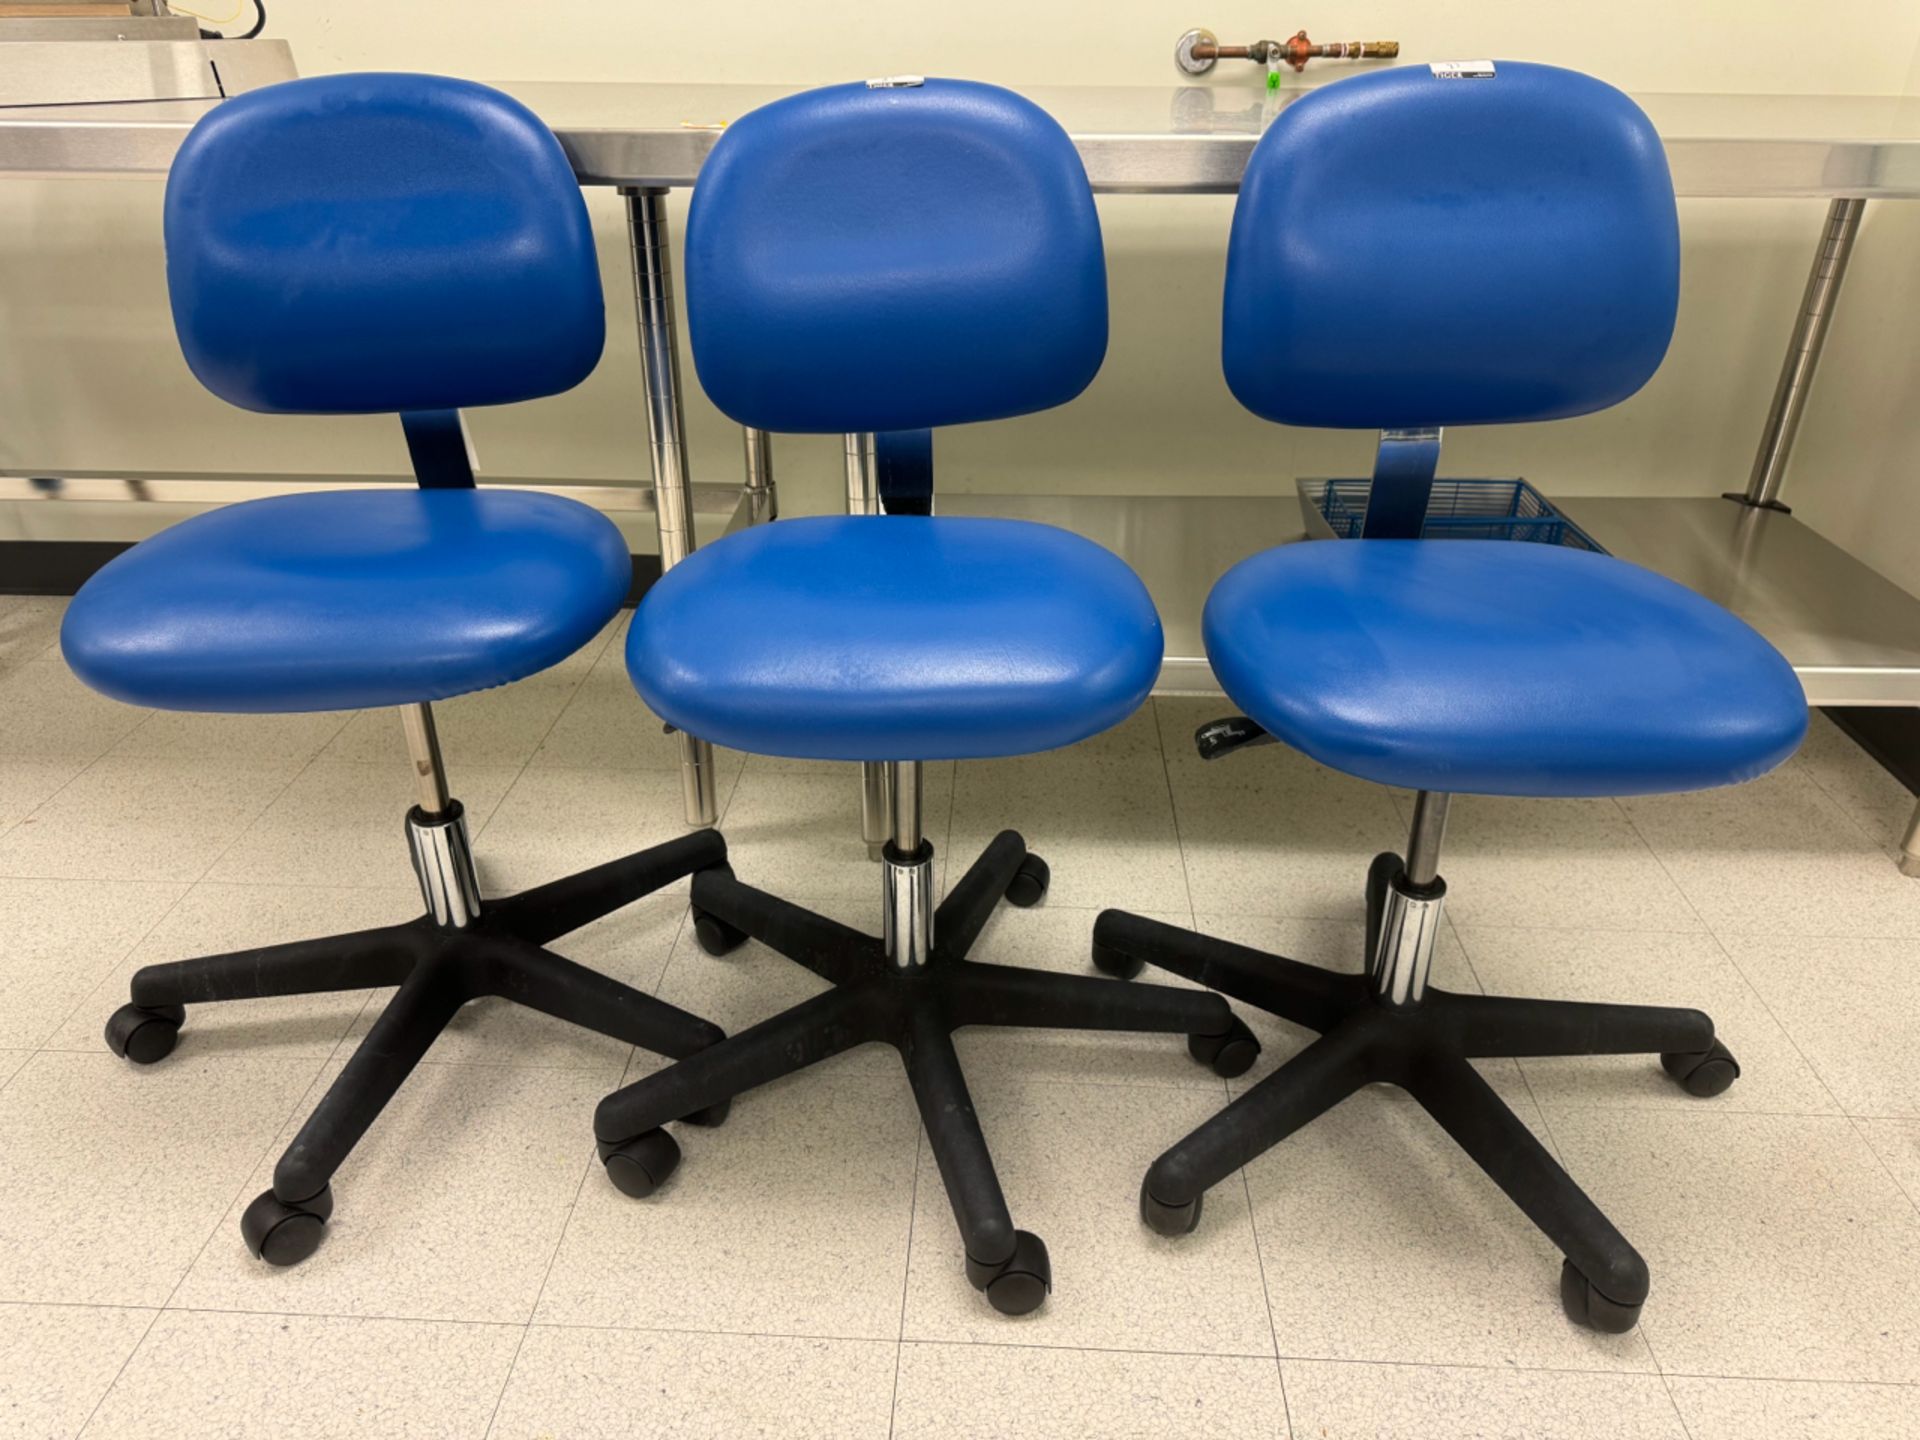 Rolling Lab Chairs